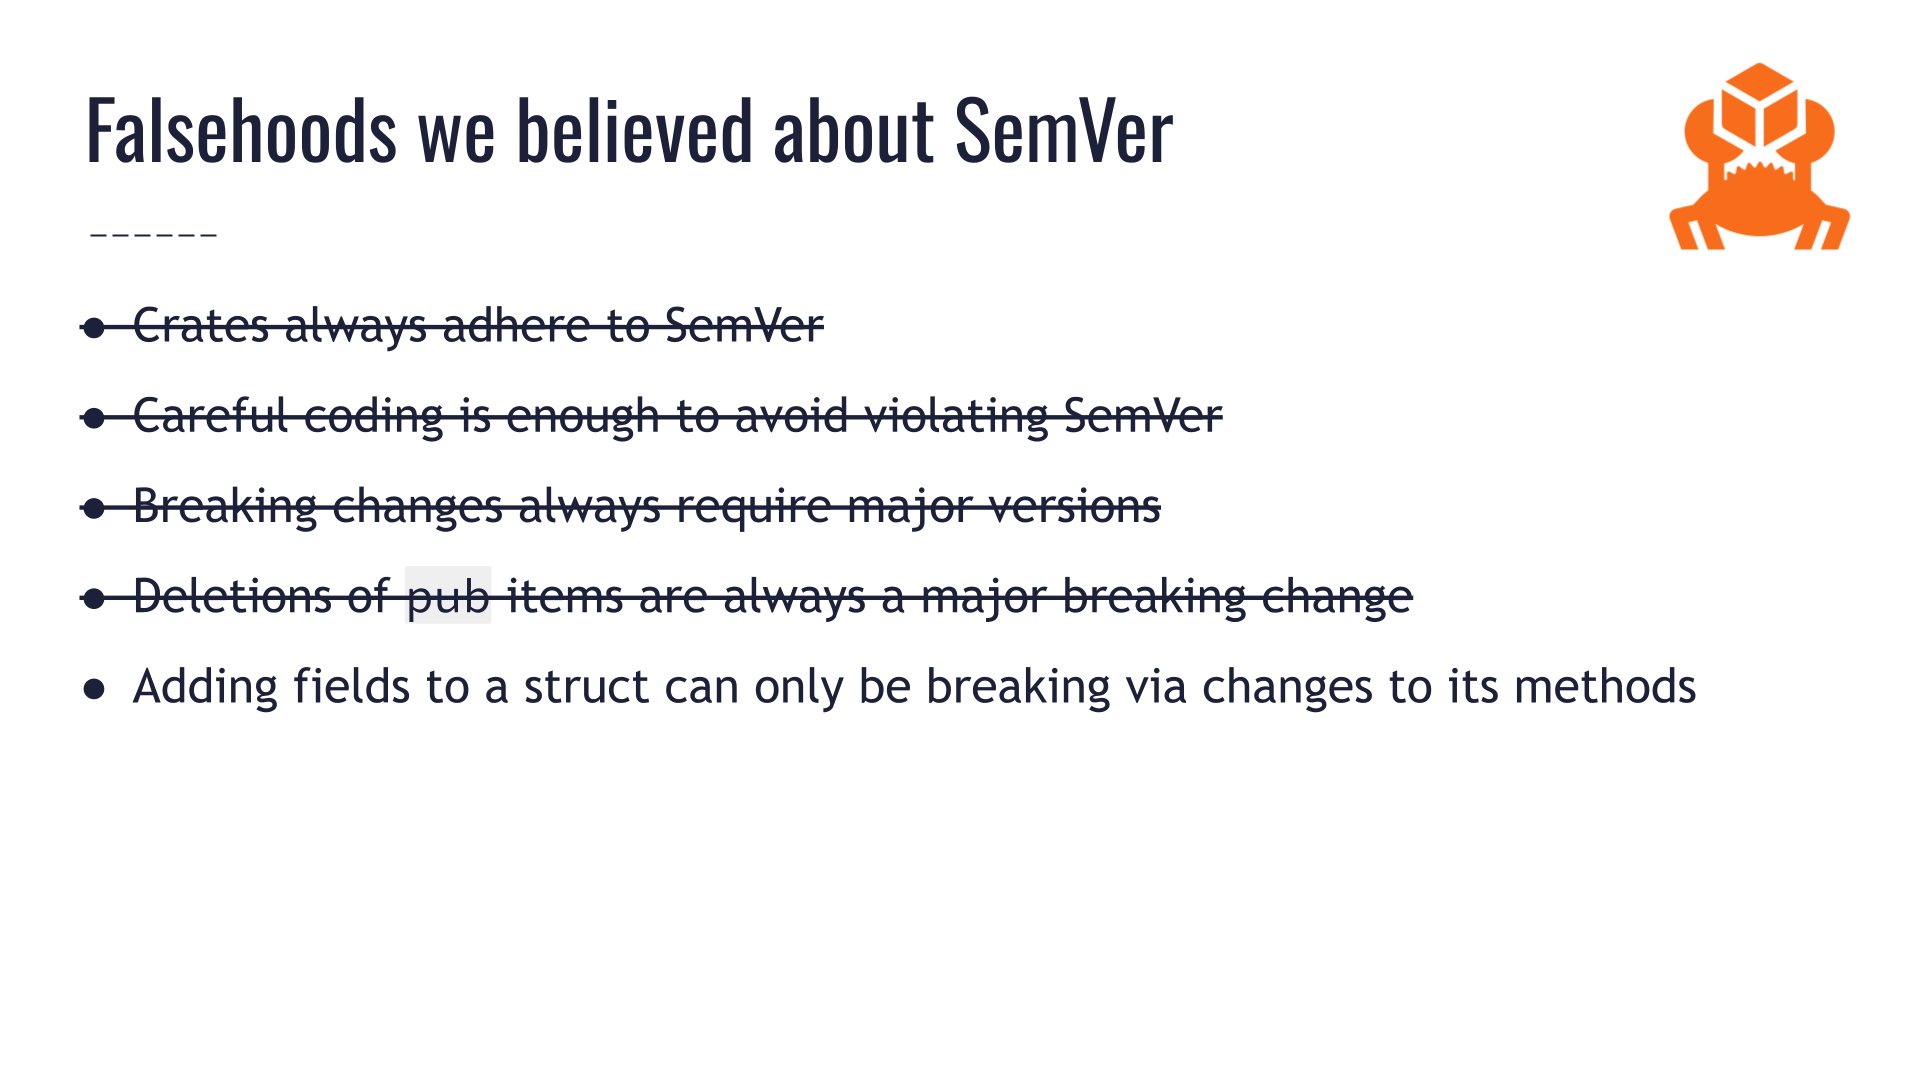 The same slide titled "Falsehoods we believed about SemVer" from earlier. A fifth bullet point says "Adding fields to a struct can only be breaking via changes to its methods." The four prior bullet points are crossed off, and there is space left for more bullet points.